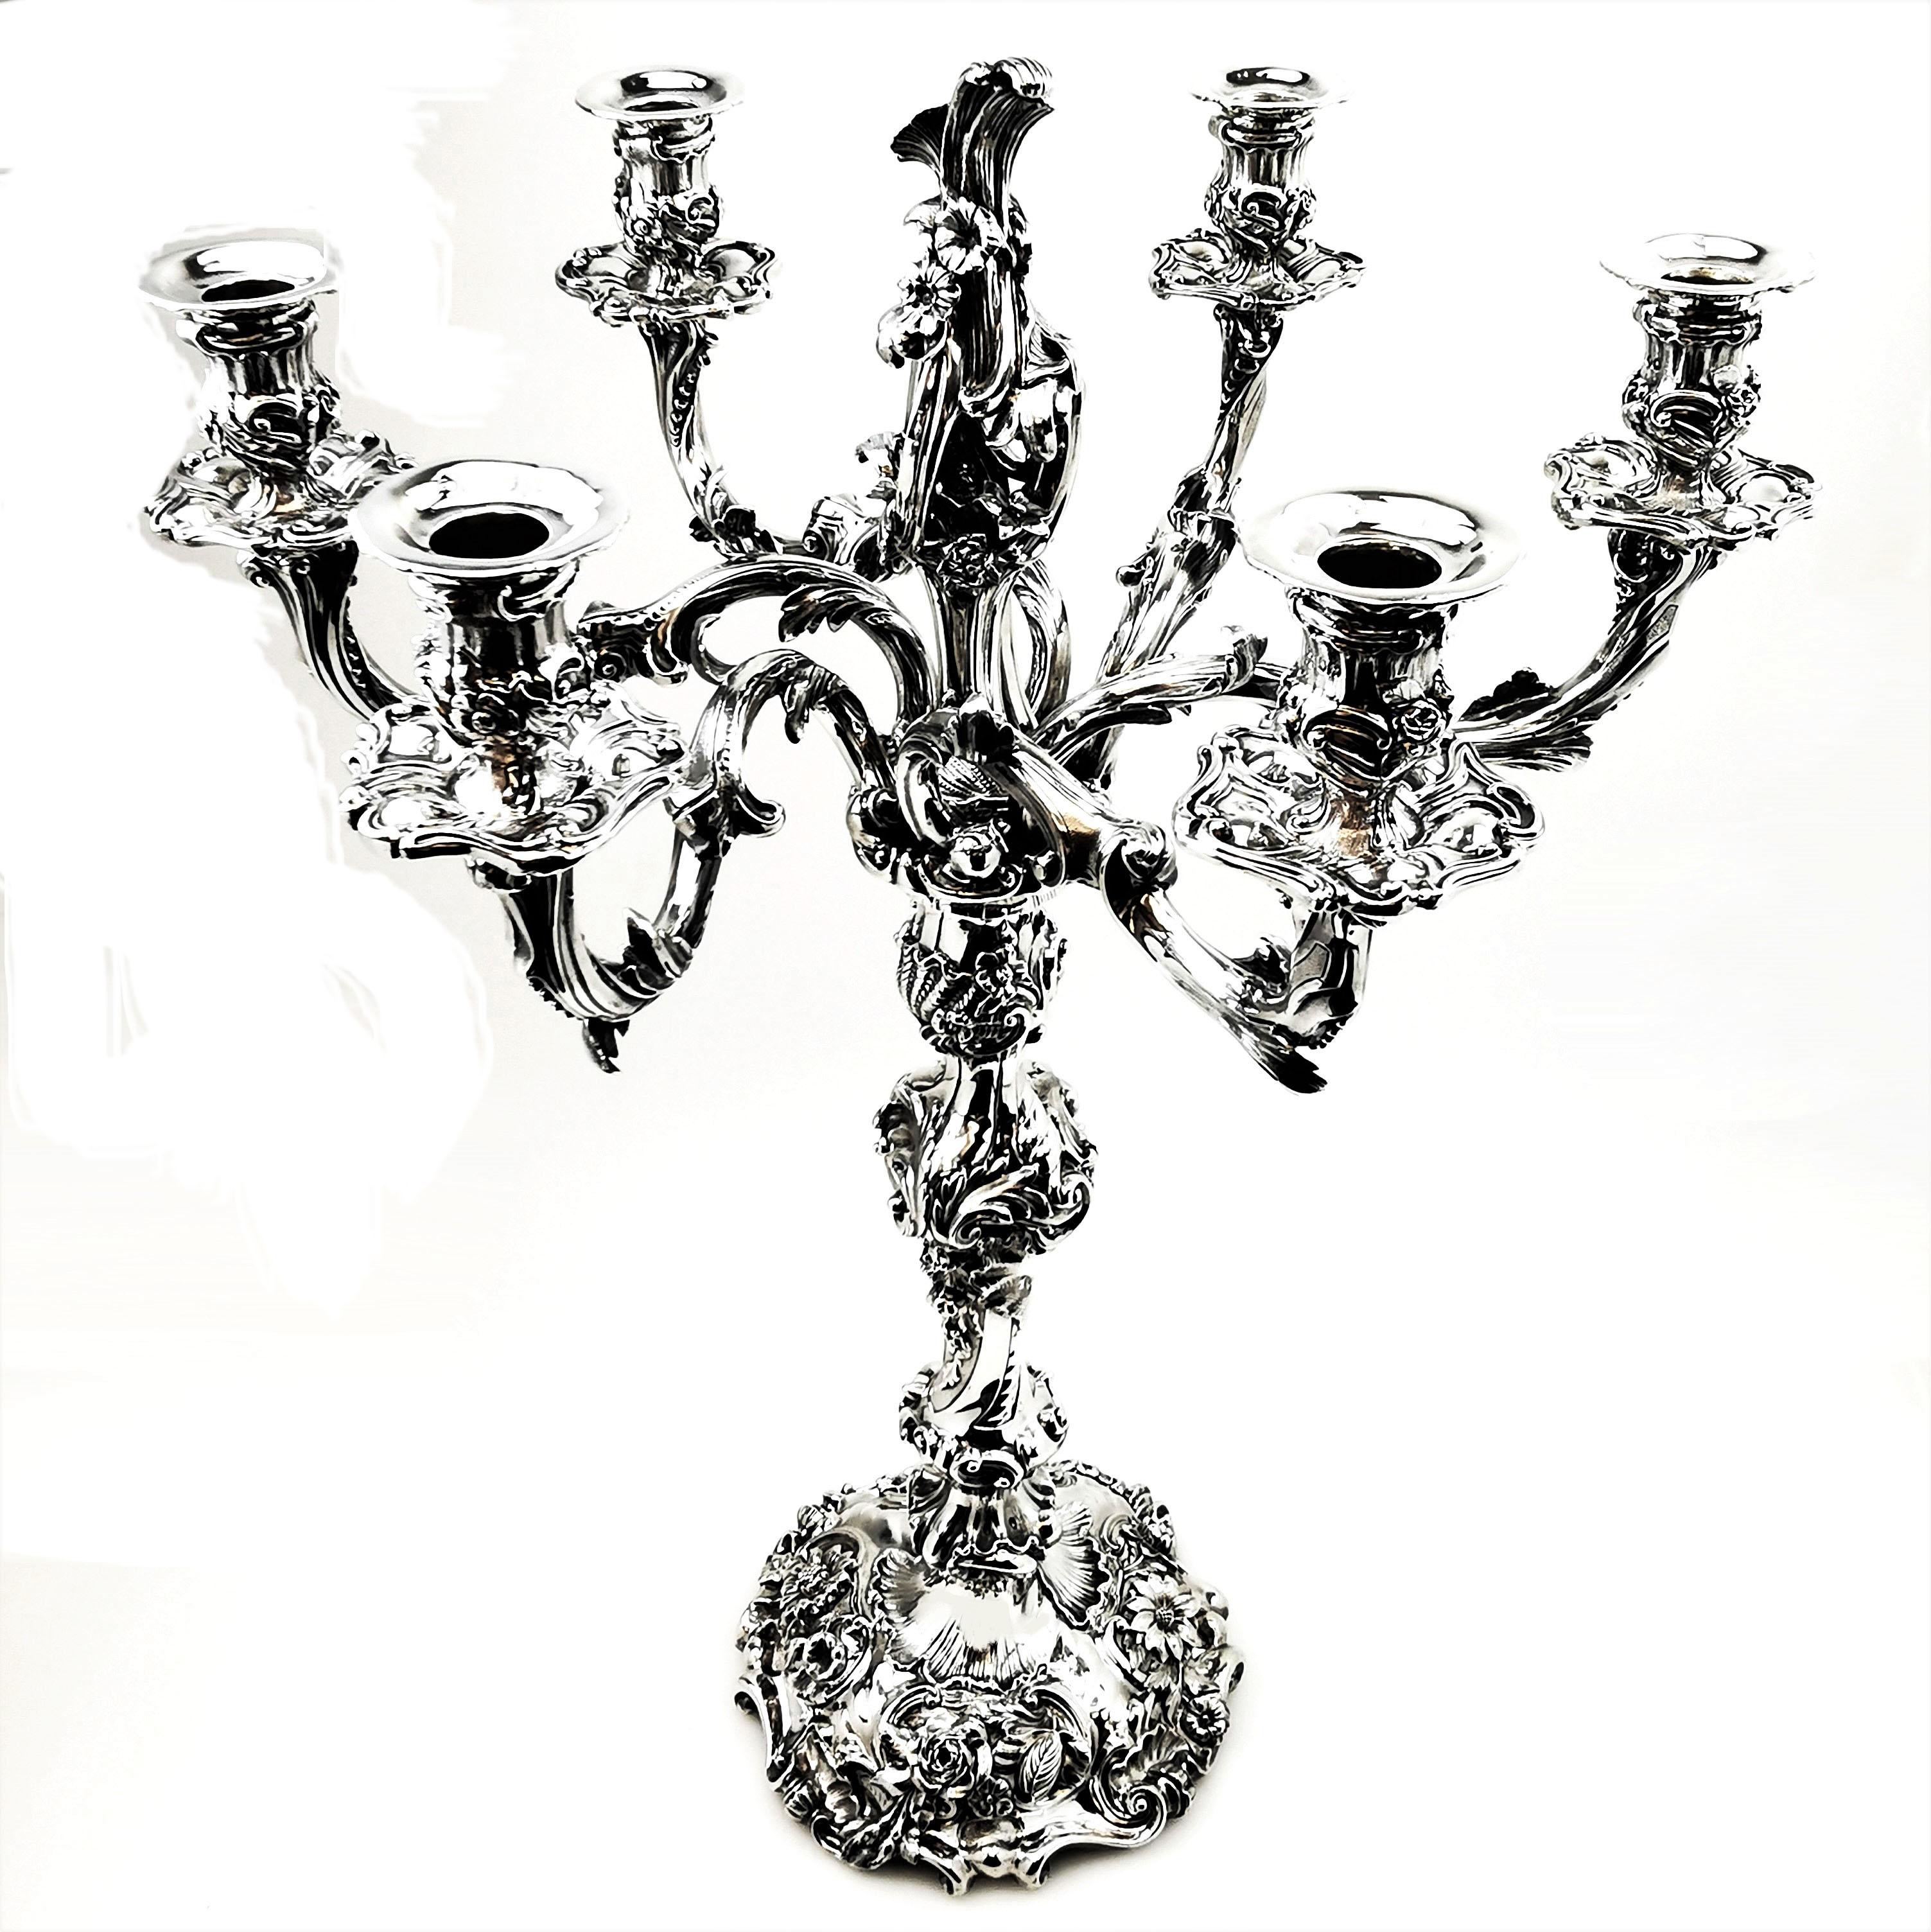 An impressive Victorian solid Silver Candelabrum with an ornate chased and applied floral design. This magnificent candelabra has 6 spread branches embellished with stylised leaf designs leading into floral tops. The centre of the Candelabra has an